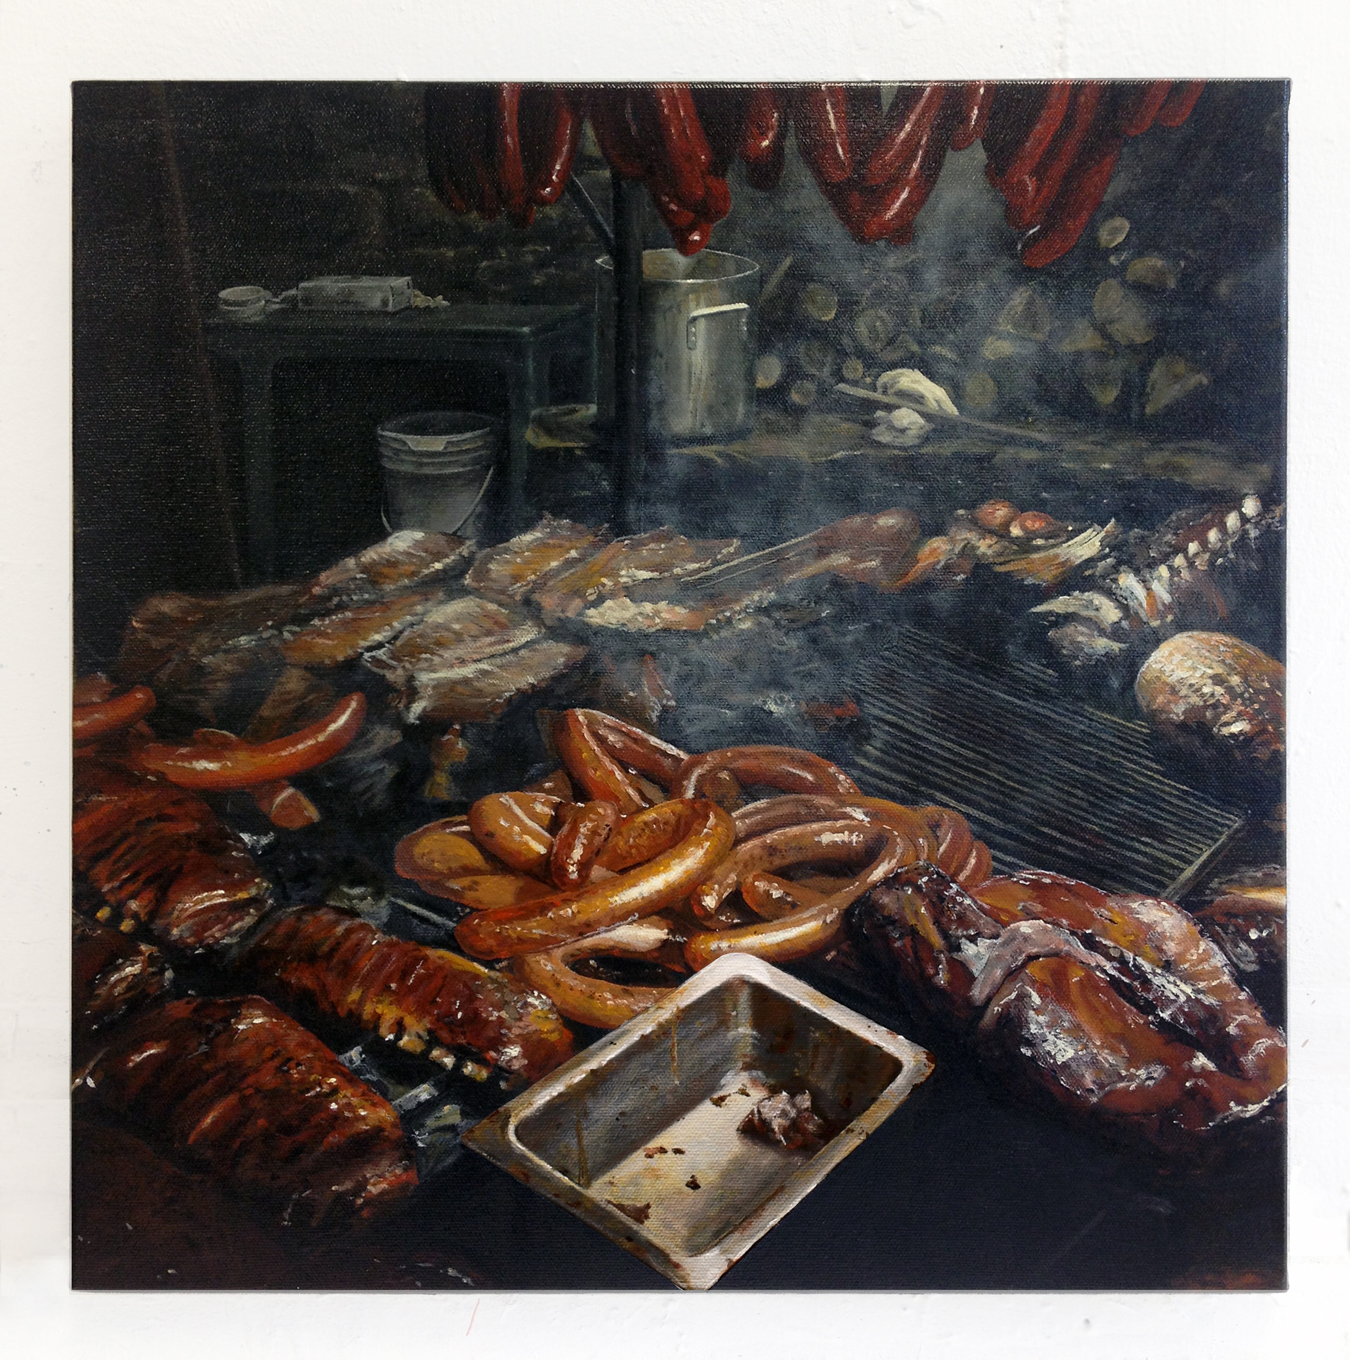    Salt Lick,  2013   Oil on canvas   16 x 16 inches  